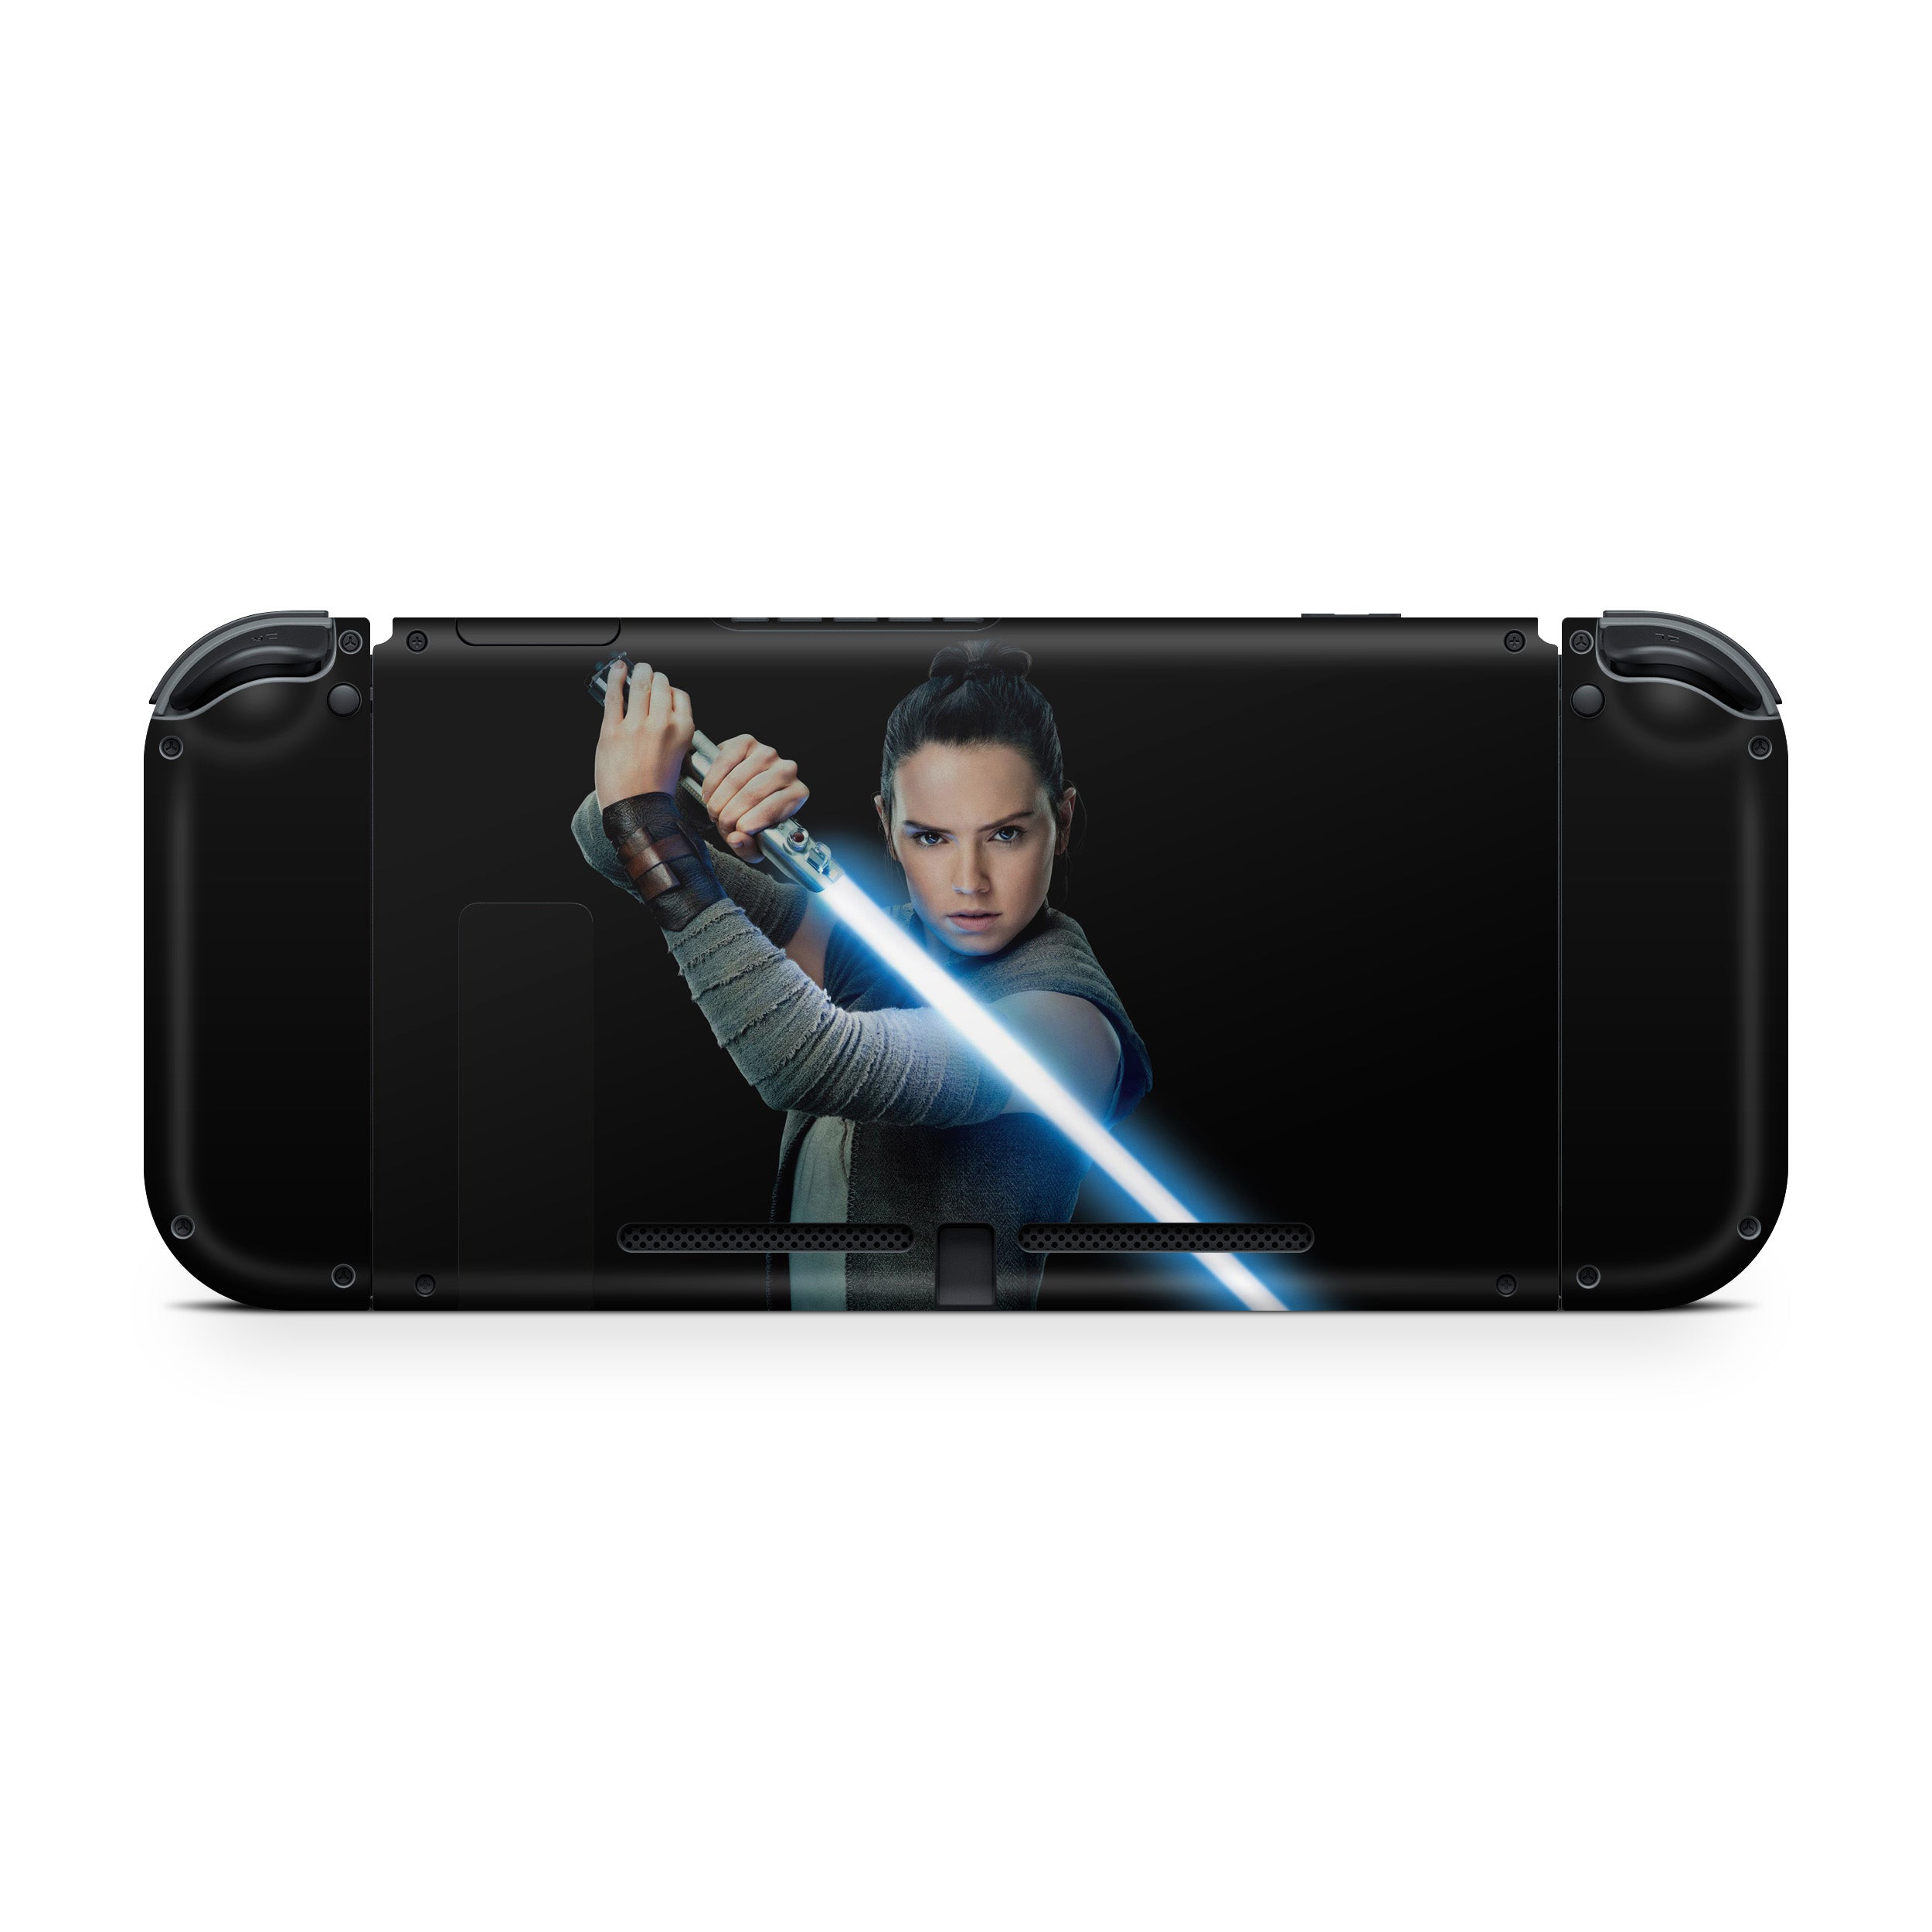 A video game skin featuring a Star Wars Rey design for the Nintendo Switch.